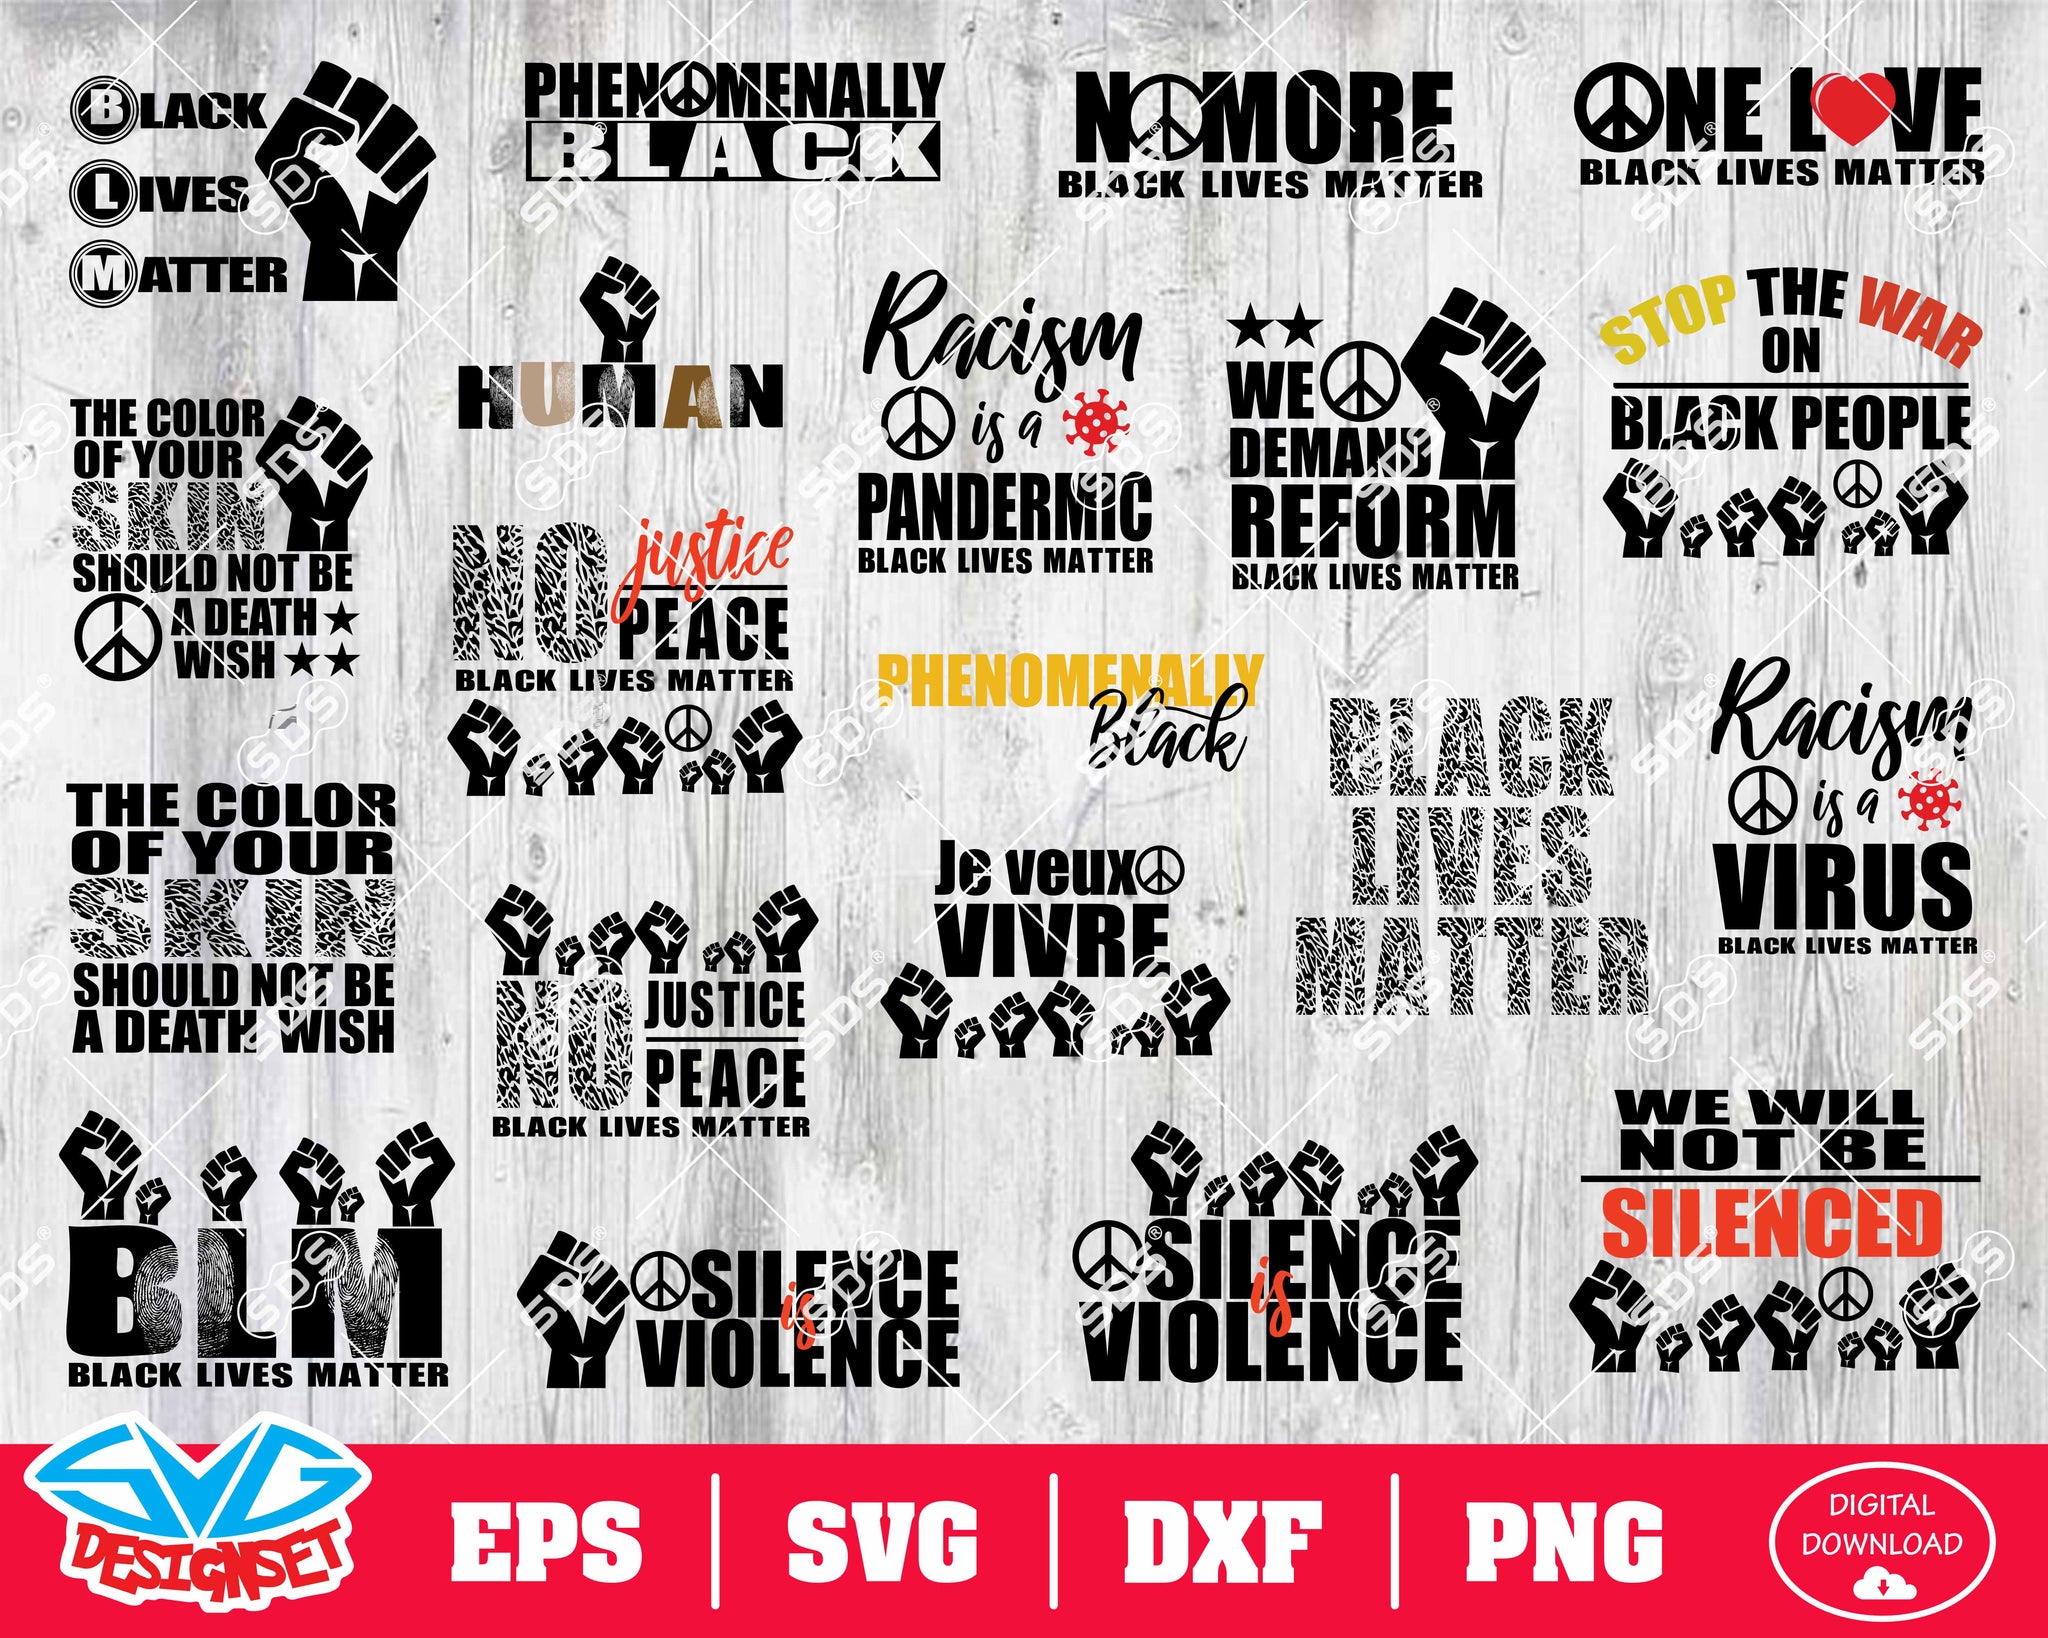 Black Lives Matter Bundle Svg, Dxf, Eps, Png, Clipart, Silhouette and Cutfiles #2 - SVGDesignSets